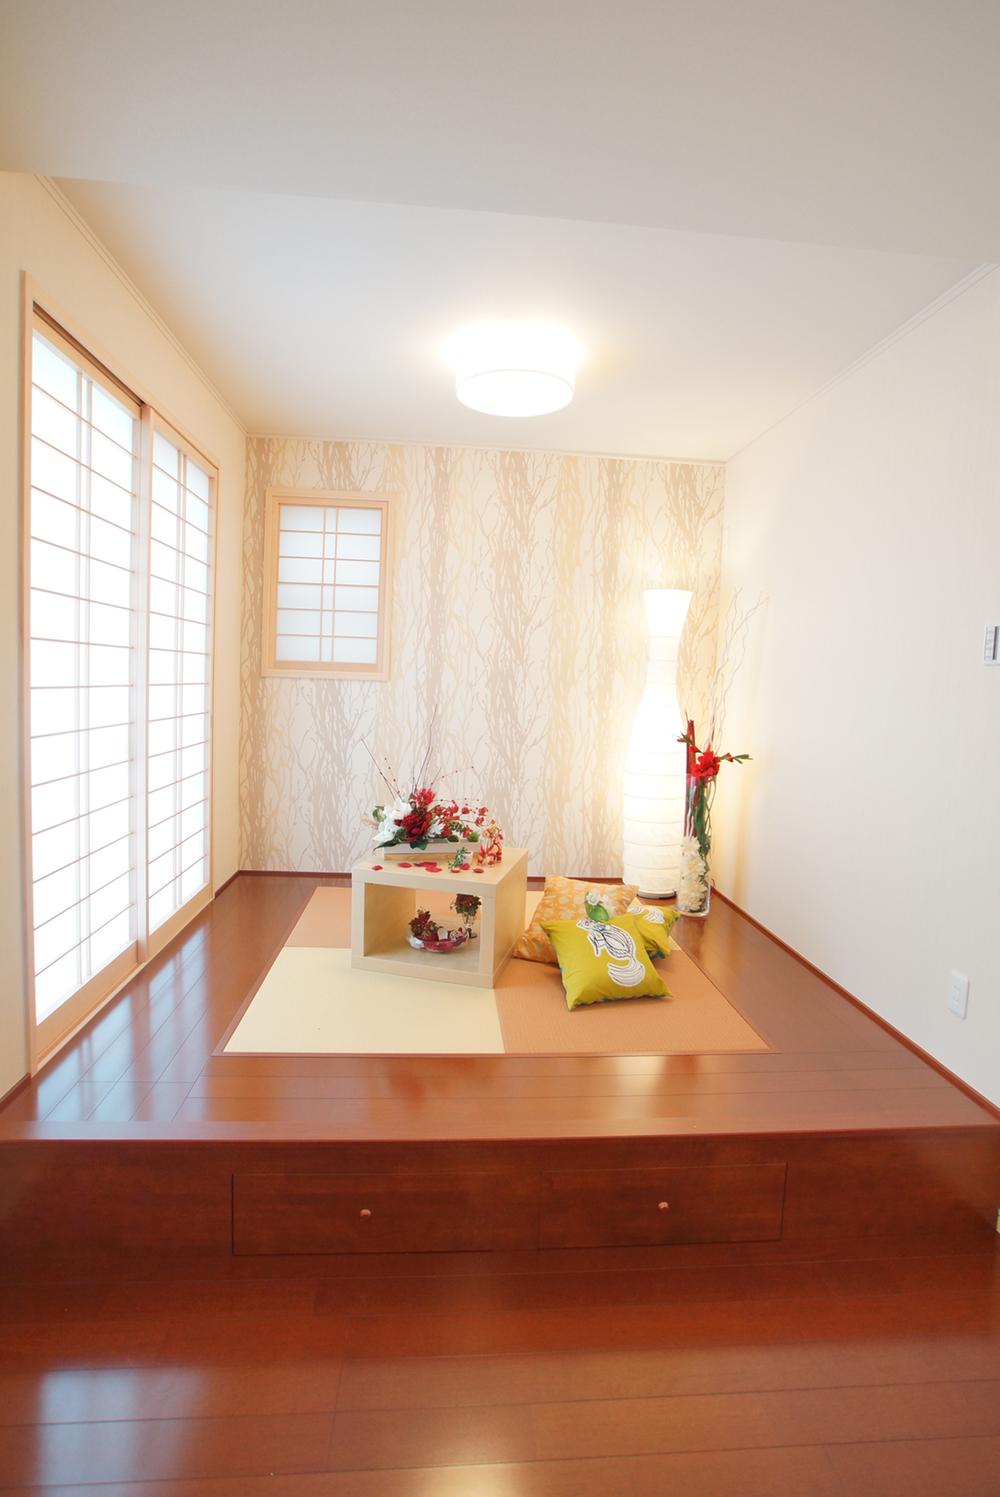 Model house photo. Living the back of the Japanese-style room. Below it has become the storage